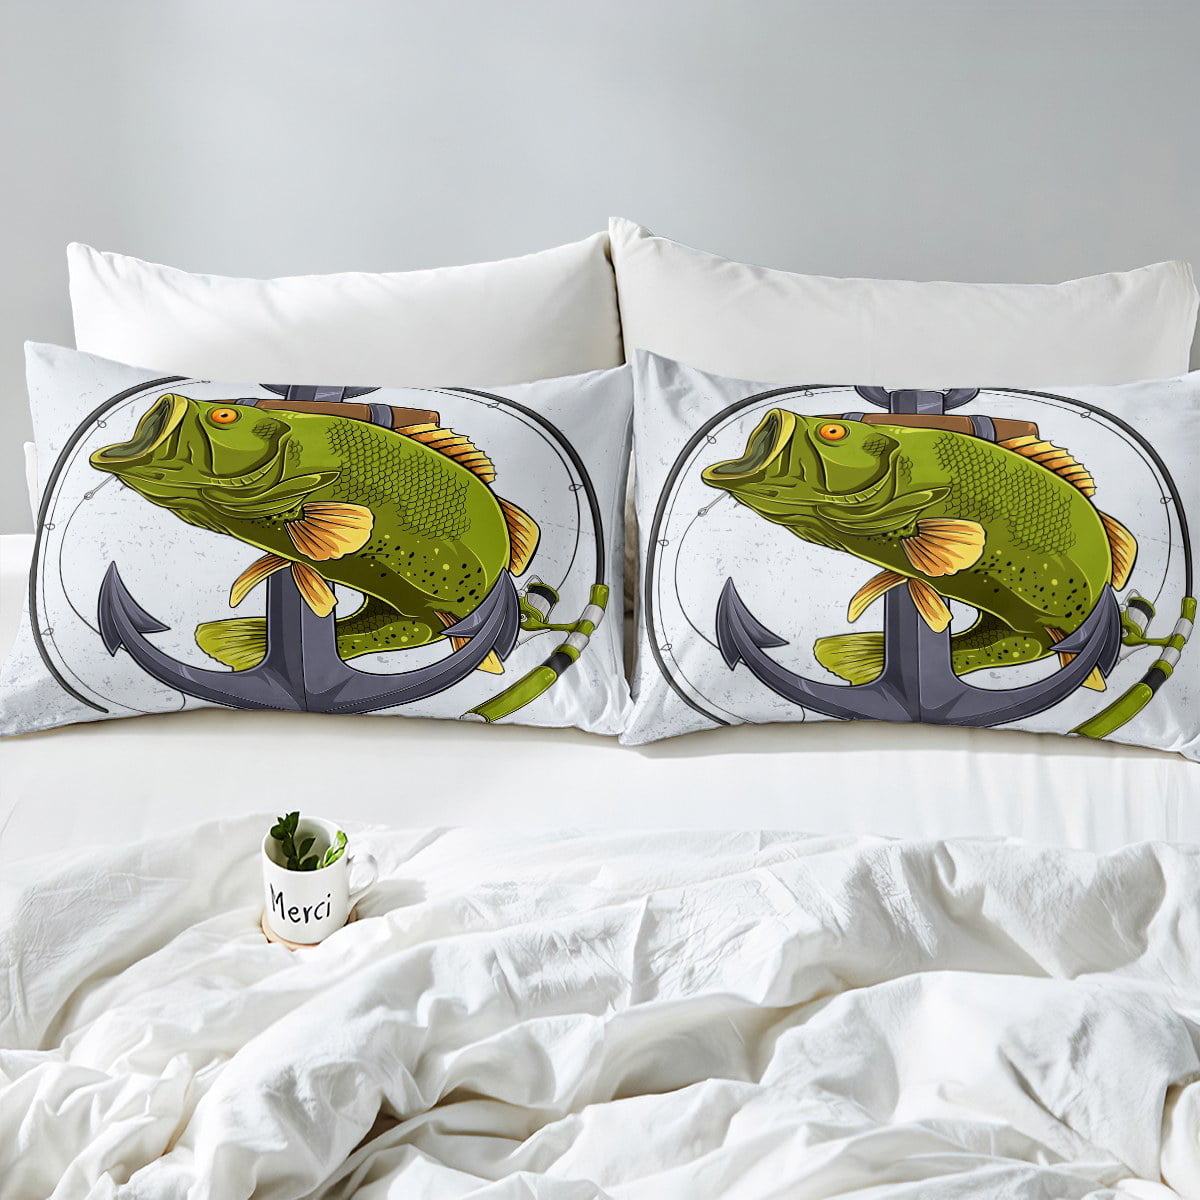 YST Green Bass Fish Duvet Cover Queen Vintage Anchor Bedding Set, Nautical  Theme Comforter Cover Fishing Reel Bed Sets, Rustic Farmhouse Decor Bedding  for Kids Bedroom Decor 3pcs 